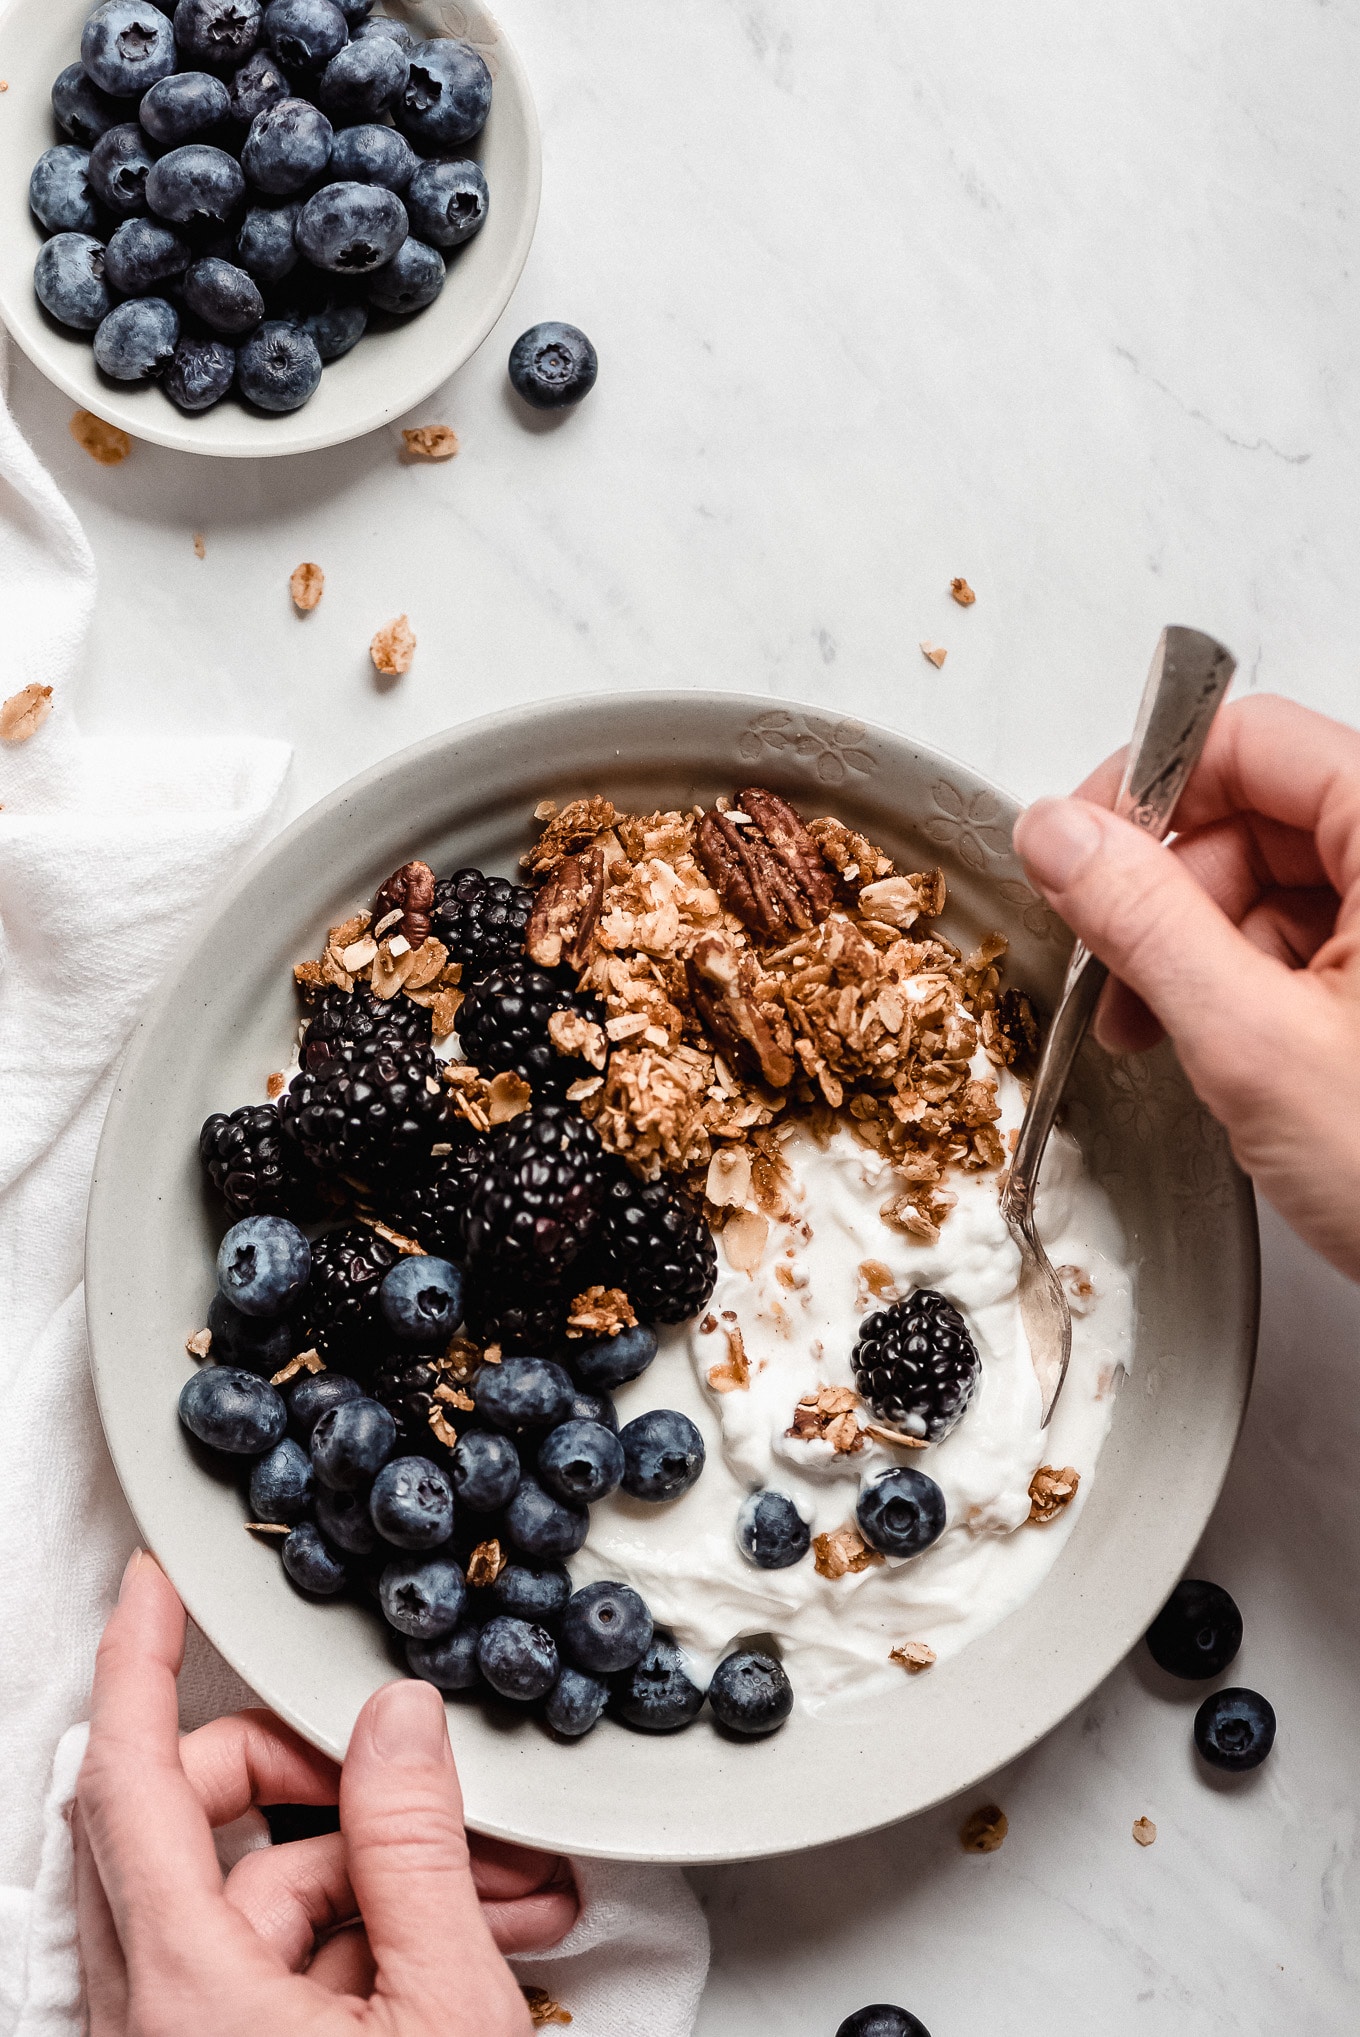 Top view of a bowl of plain Greek yogurt, topped with blackberries, blueberries, and granola with a hand scooping out a bite with a spoon.